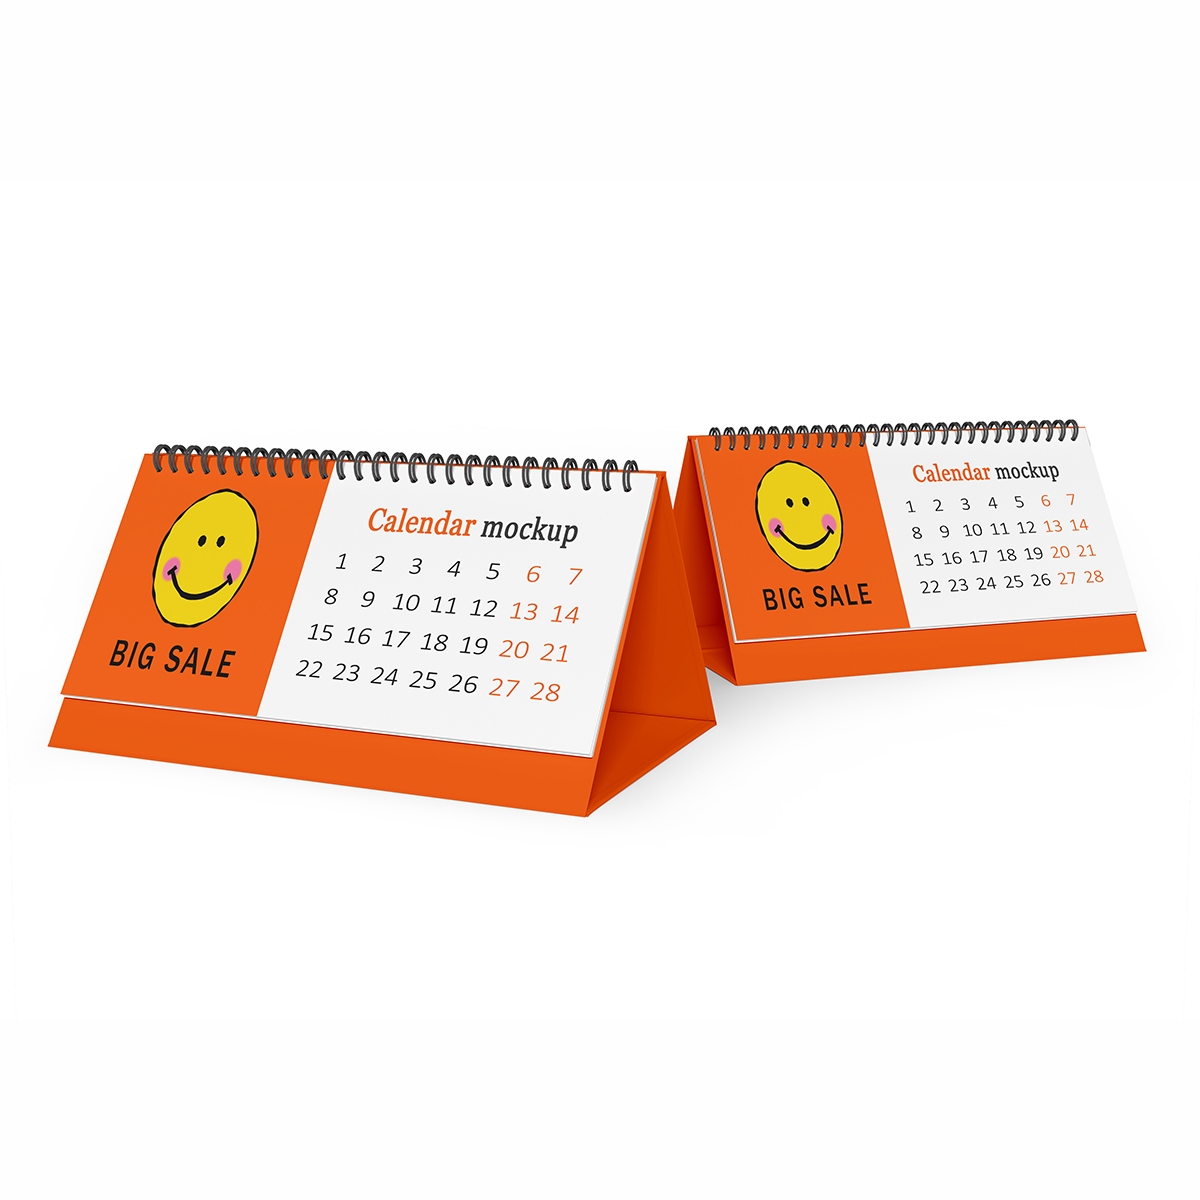 Personilized Desk Calendar Agenda Daily Weekly Business Planner